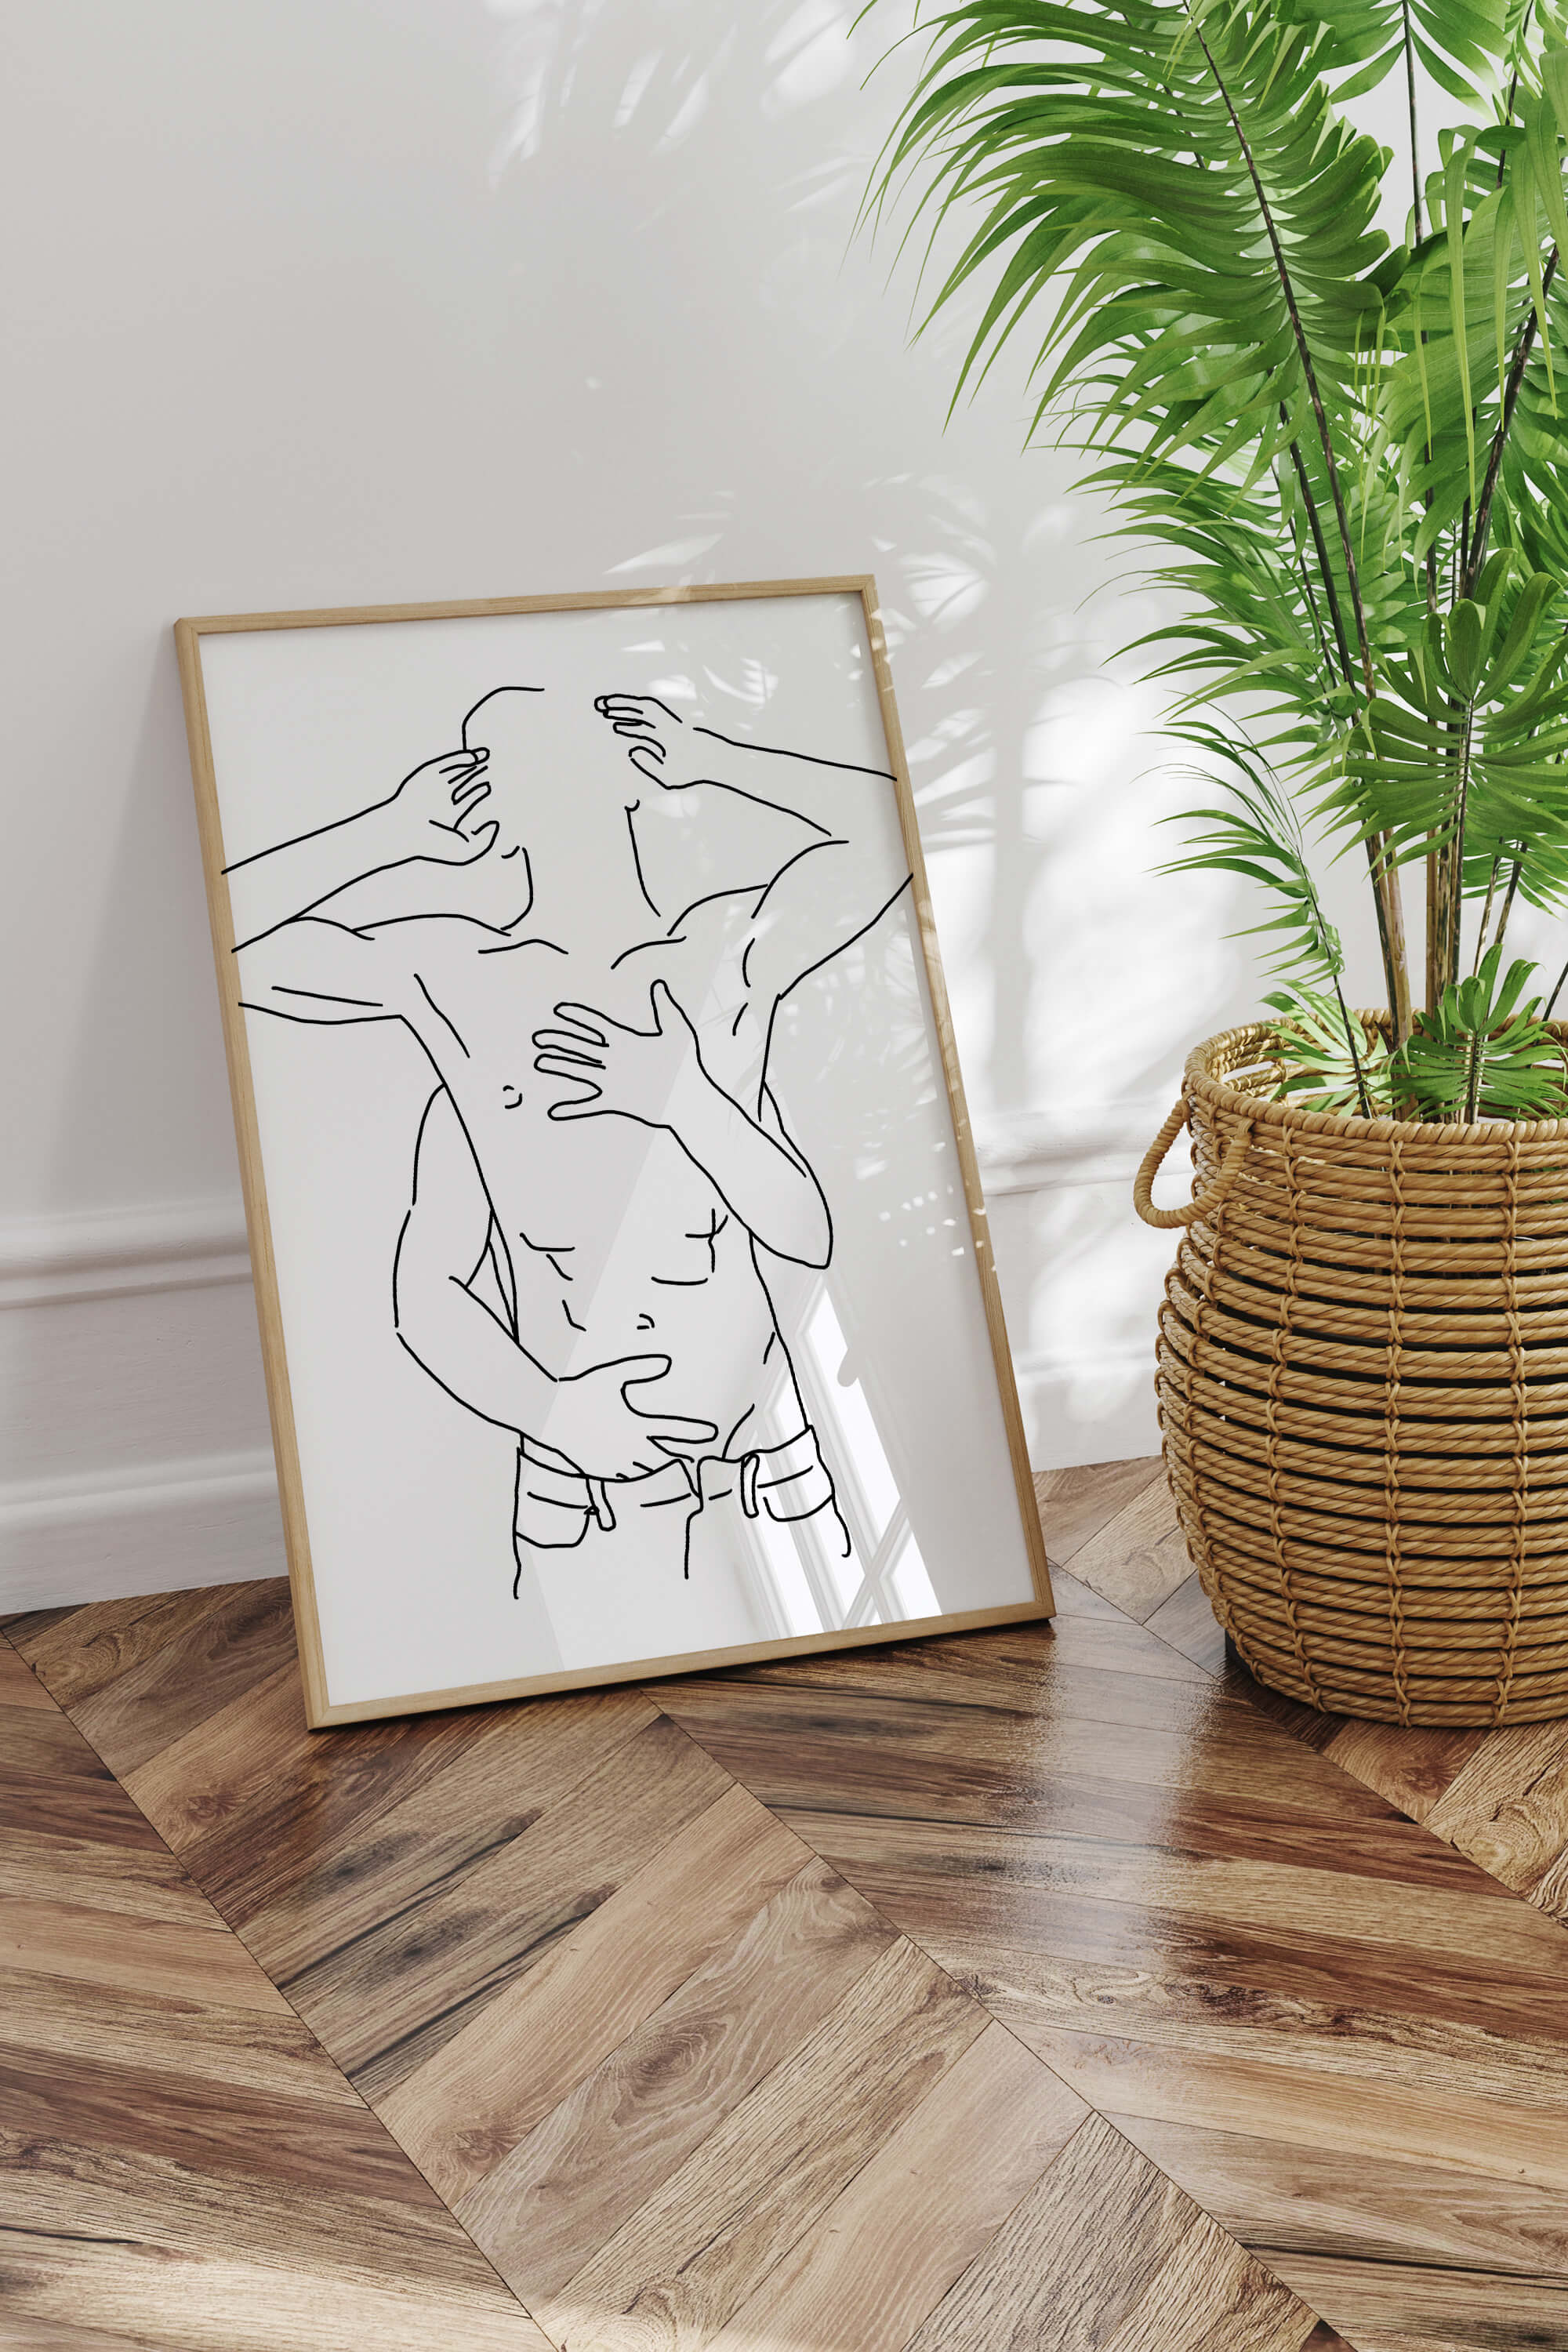 Timeless beauty in this monochrome masterpiece, depicting a male couple's embrace with artful lines. A perfect addition for art enthusiasts seeking sophisticated and emotionally resonant wall decor.